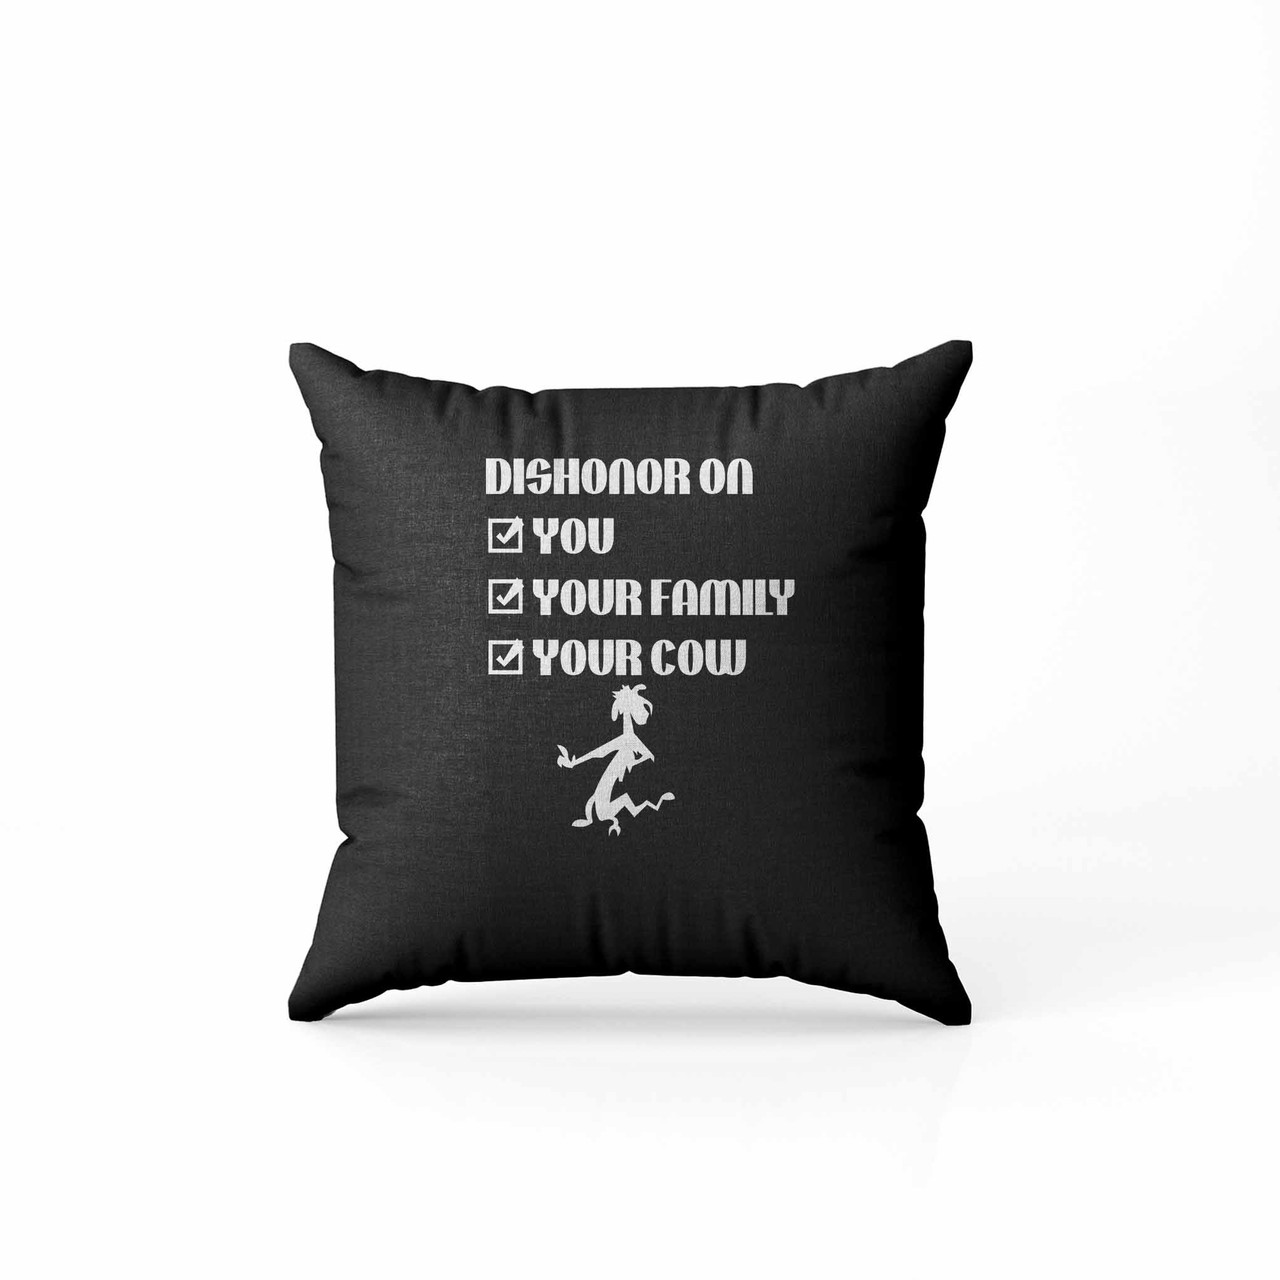 Mushu Mulan Quotes Dishonor Your Cow Funny Pillow Case Cover